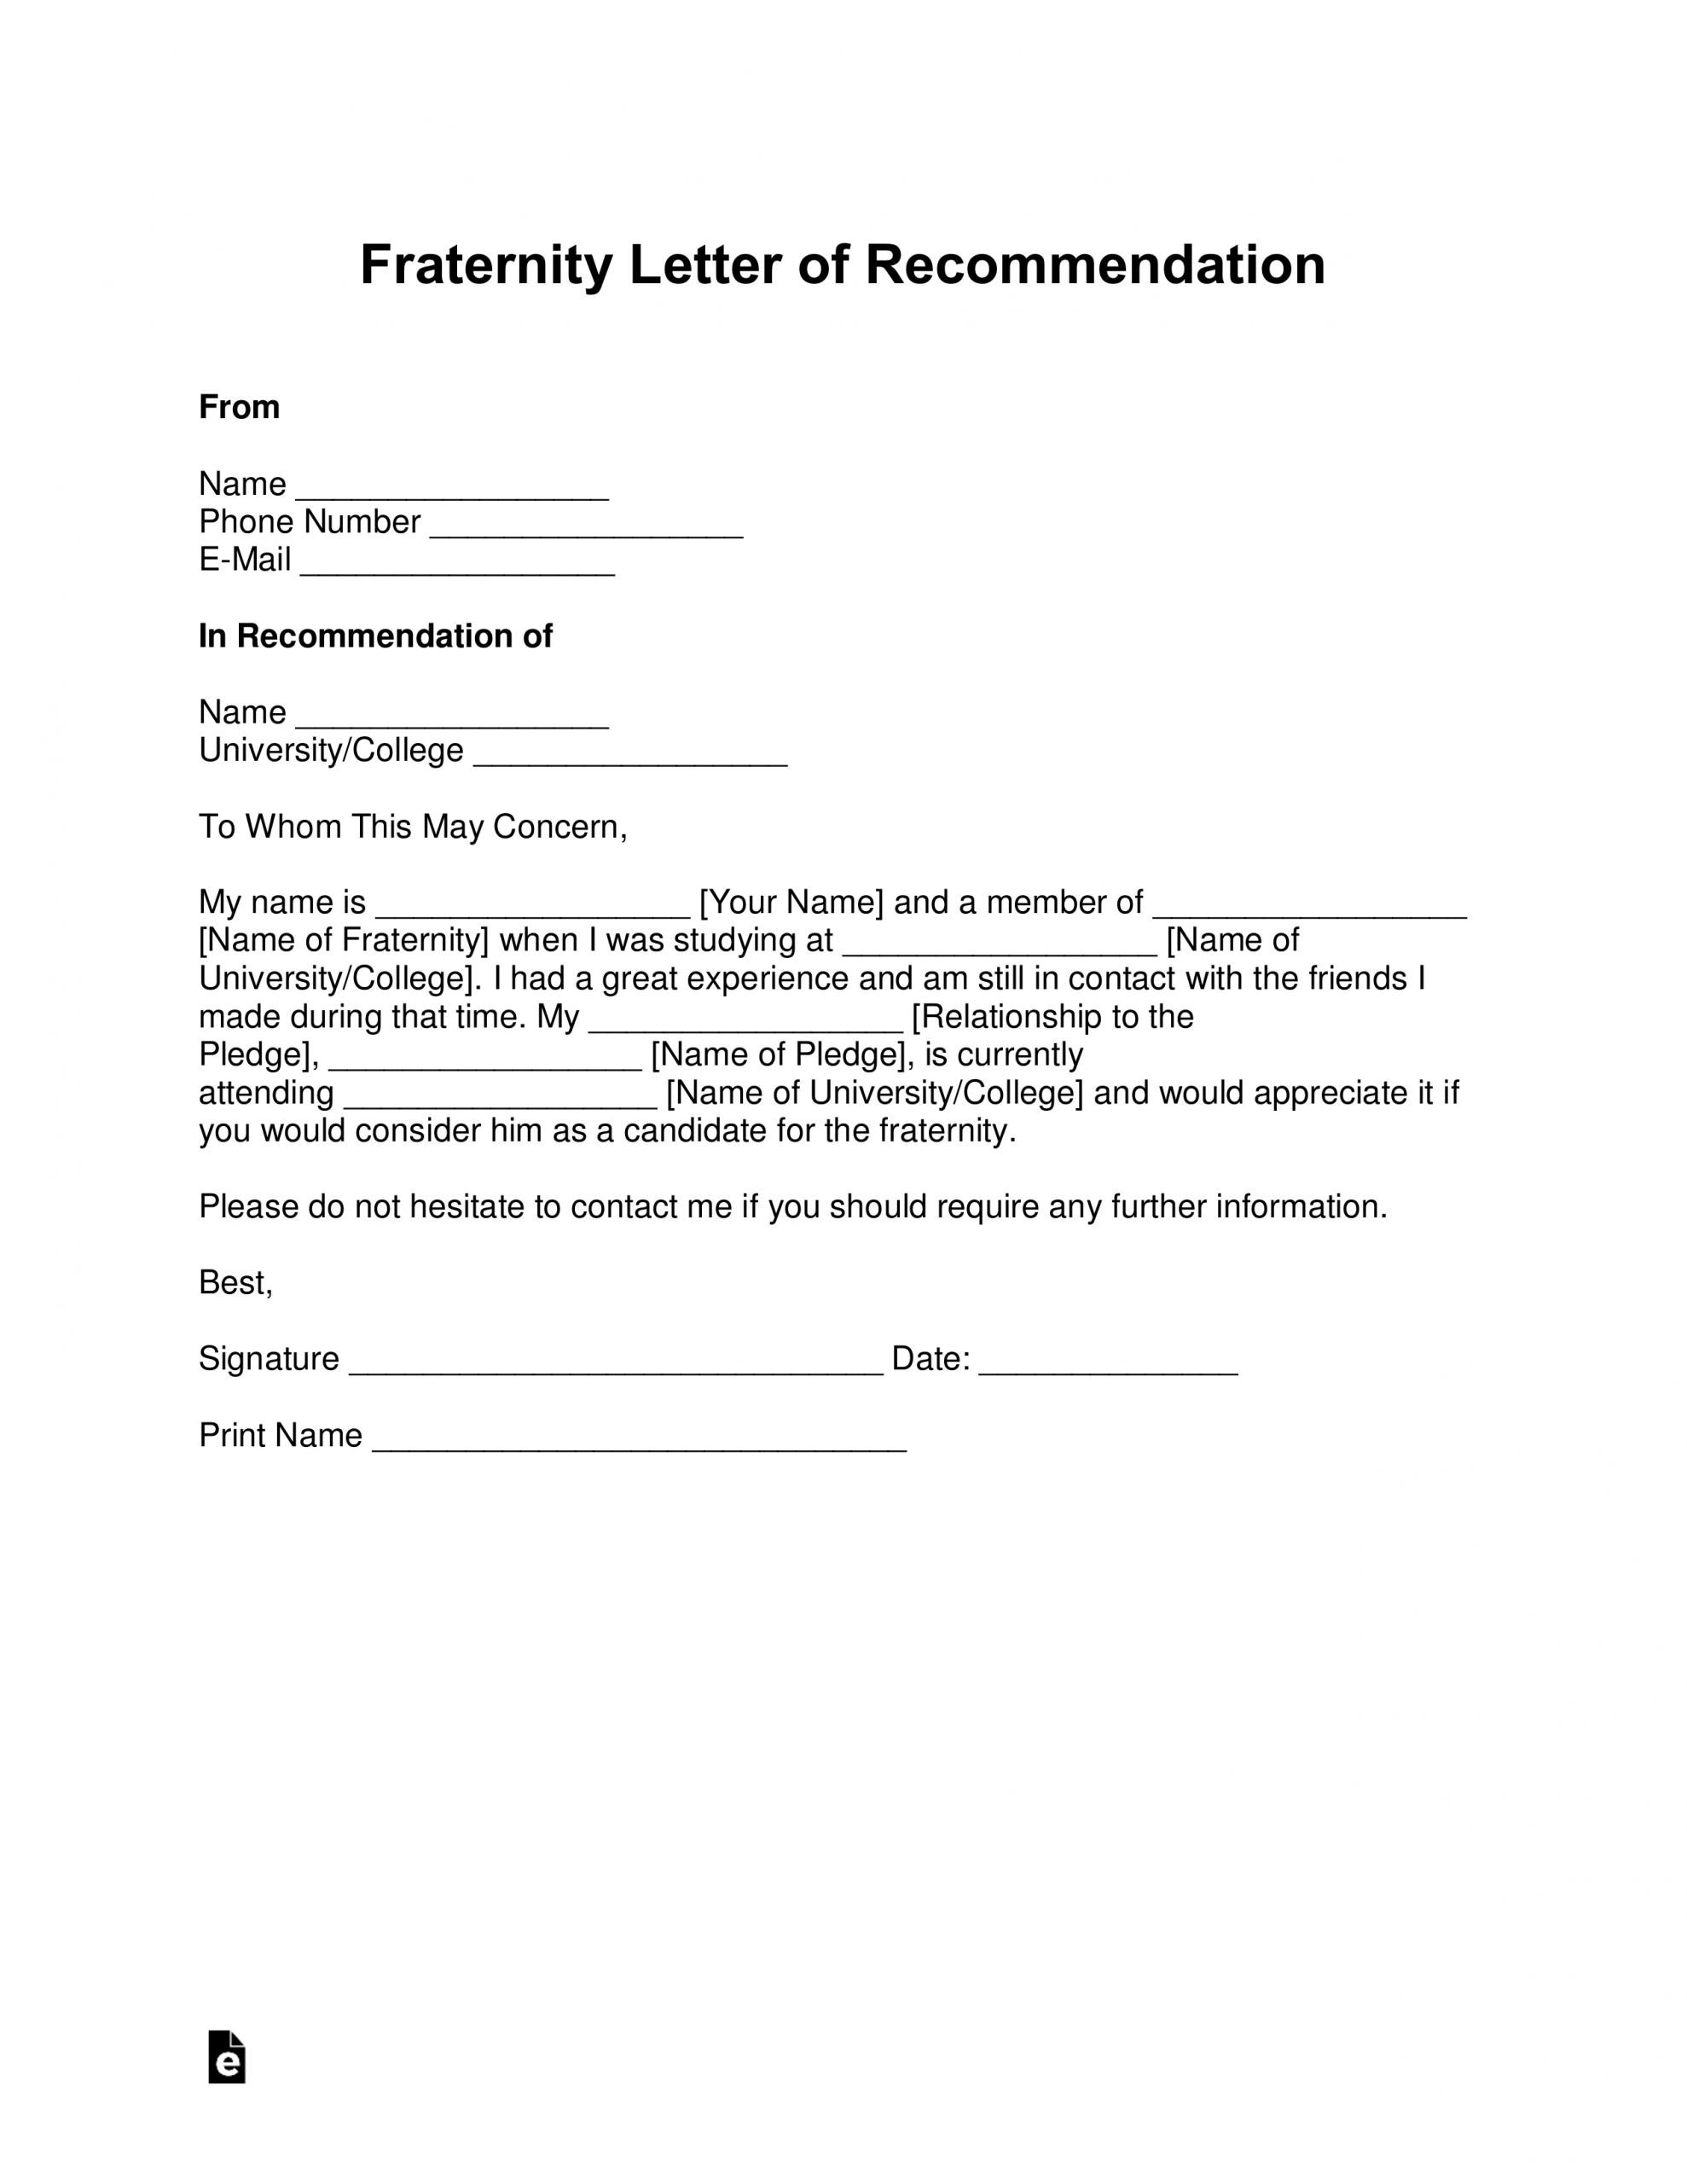 Free Fraternity Letter Of Recommendation Template With inside dimensions 2550 X 3301